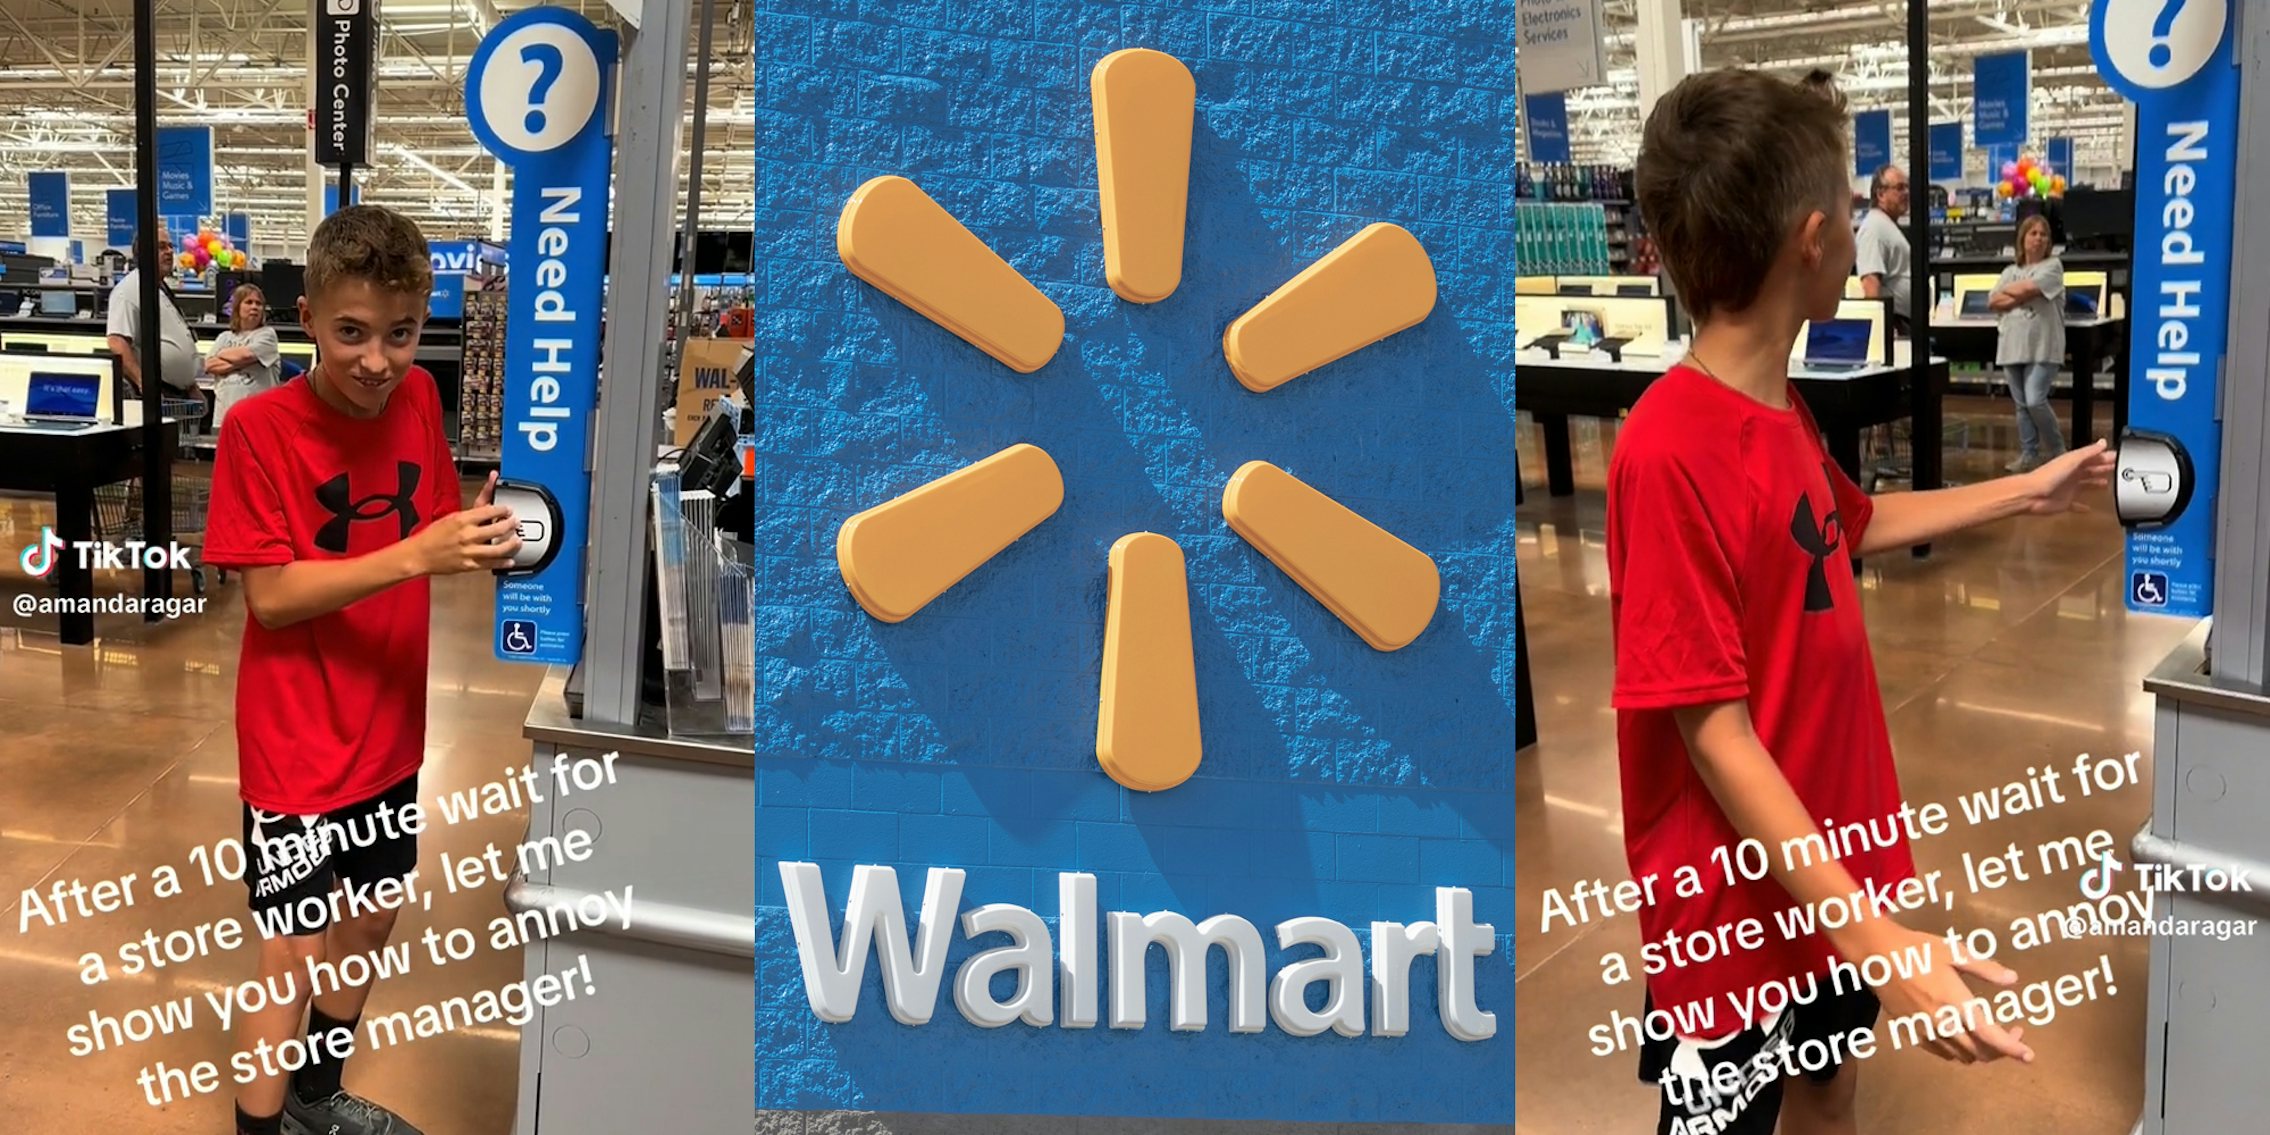 boy in Walmart pressing 'Need Help' button with caption 'After a 10 minute wait for a store worker, let me show you how to annoy the store manager!' (l&r) Walmart logo on building (c)